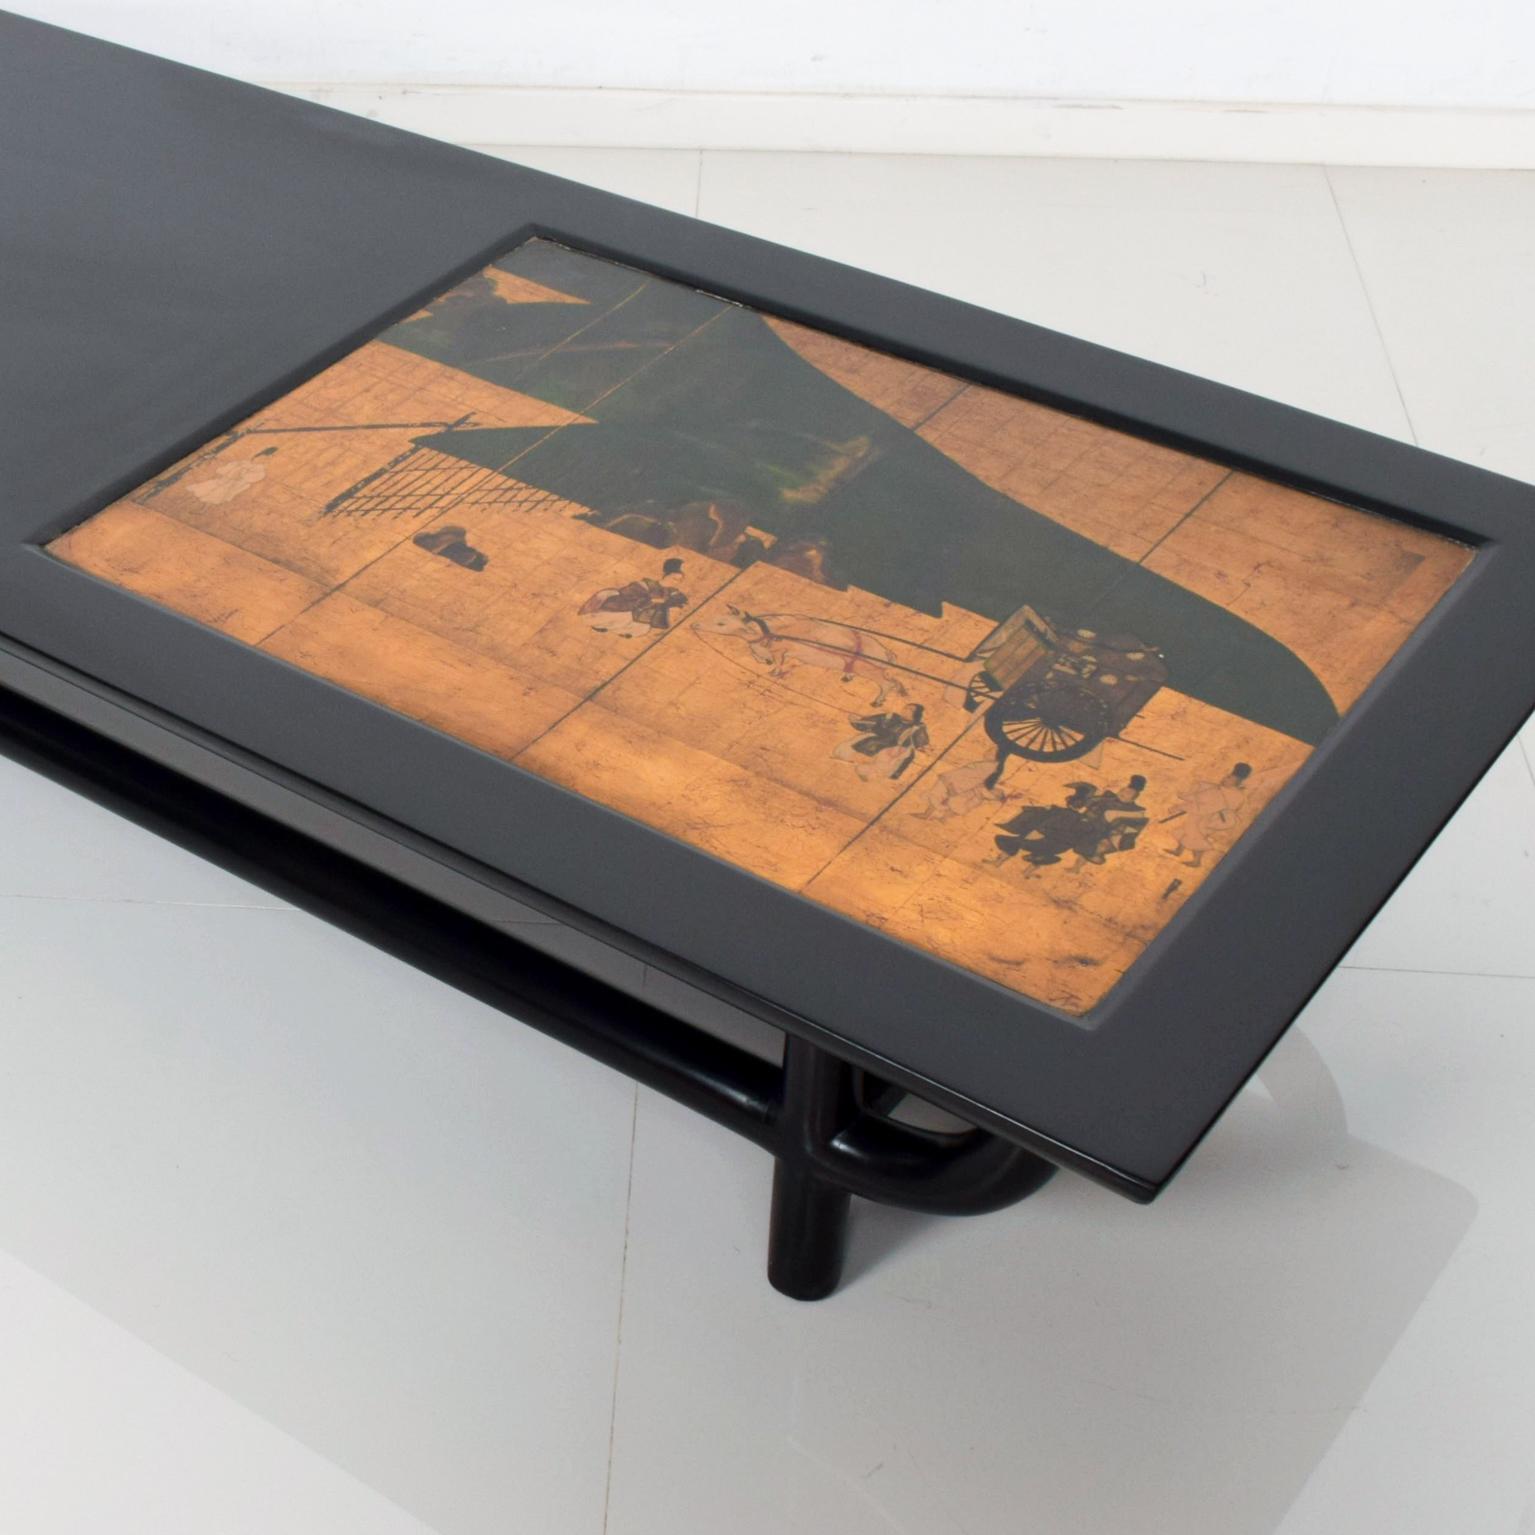 Late 20th Century 1970s Maria Teresa Méndez Gold Leaf Embellished Art Coffee Table Mexico City For Sale